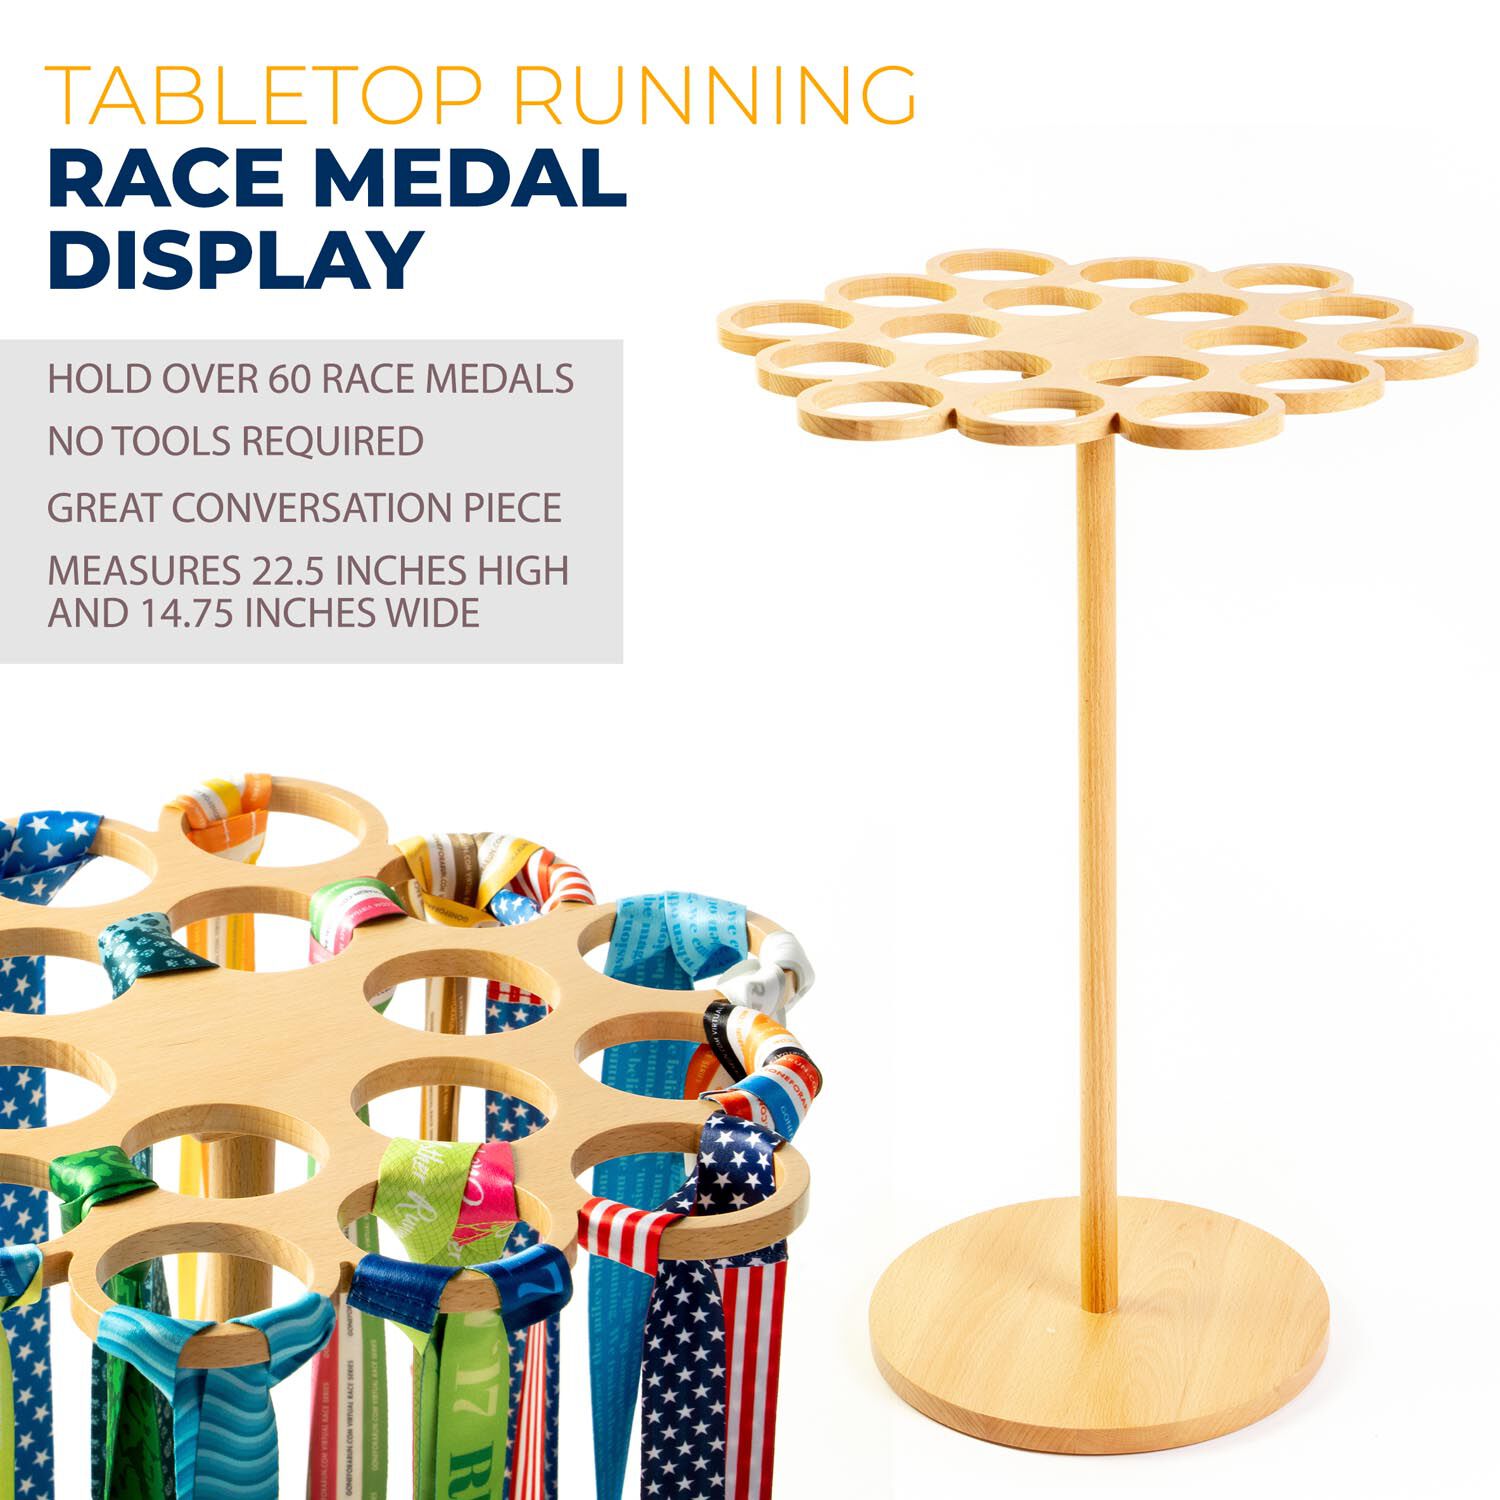 Premier Tabletop Running Race Medal Display Gone For a Run Display & Lamp 